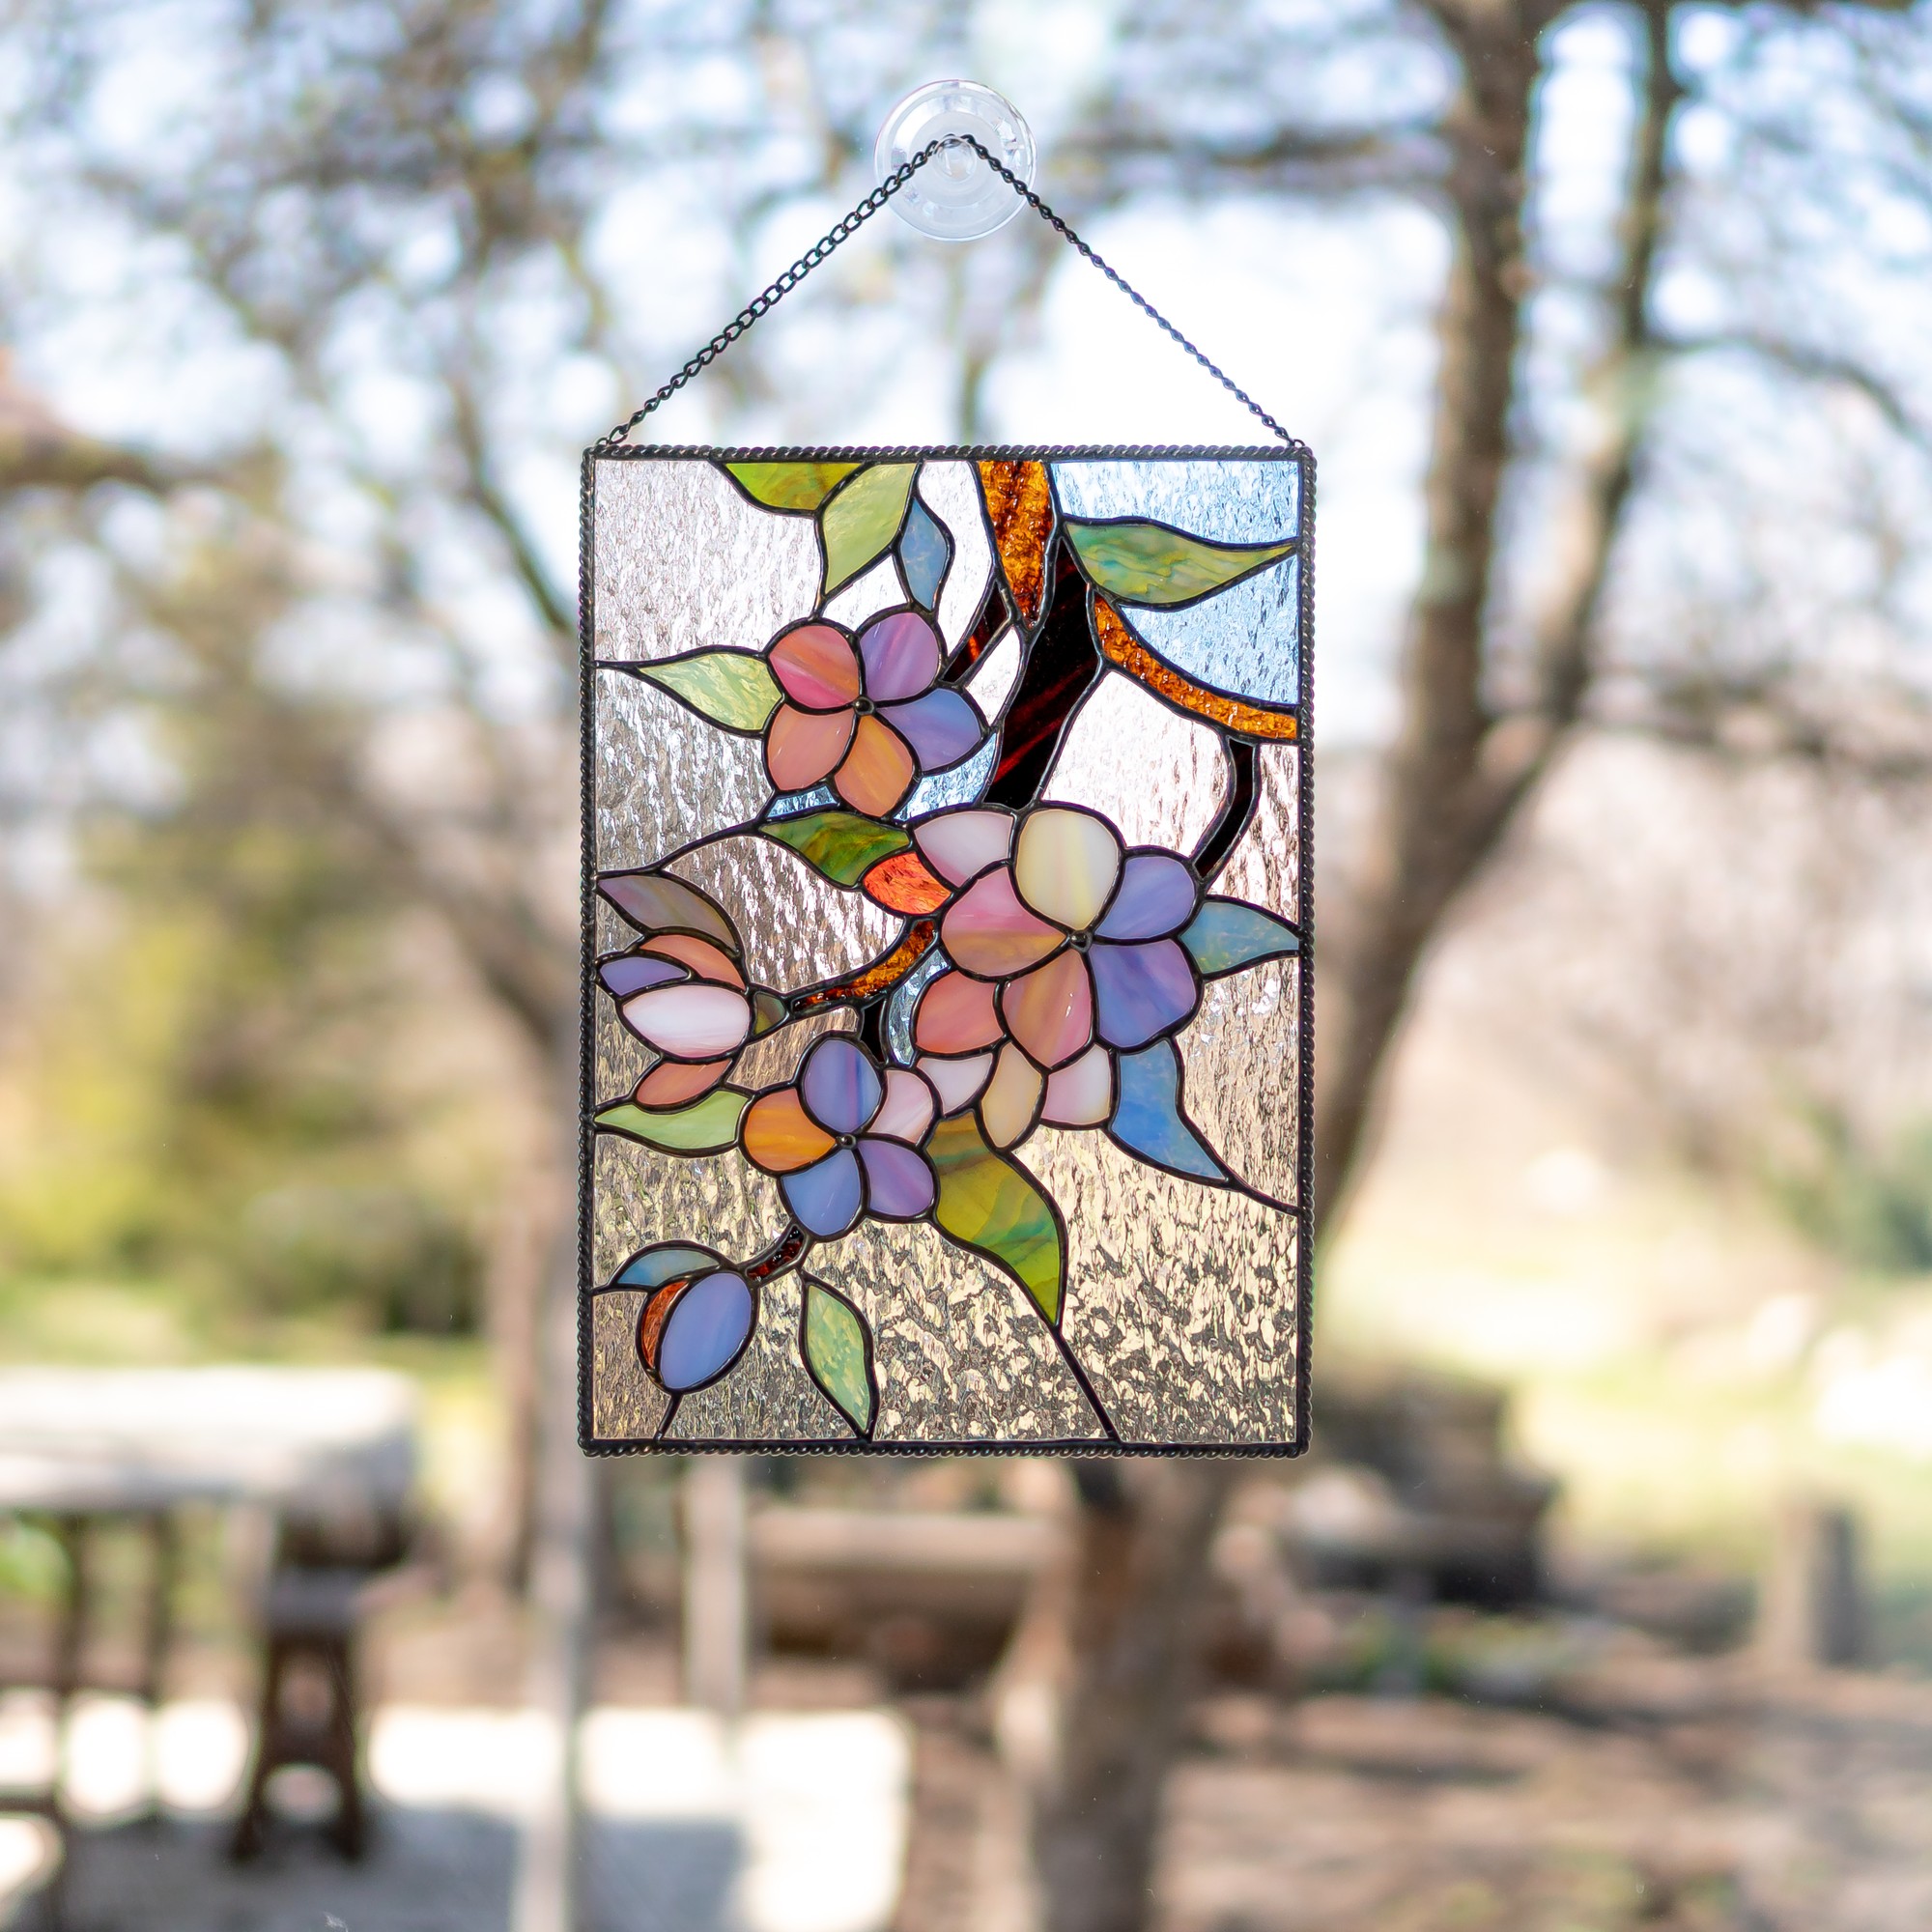 Cherry blossom stained glass window panel